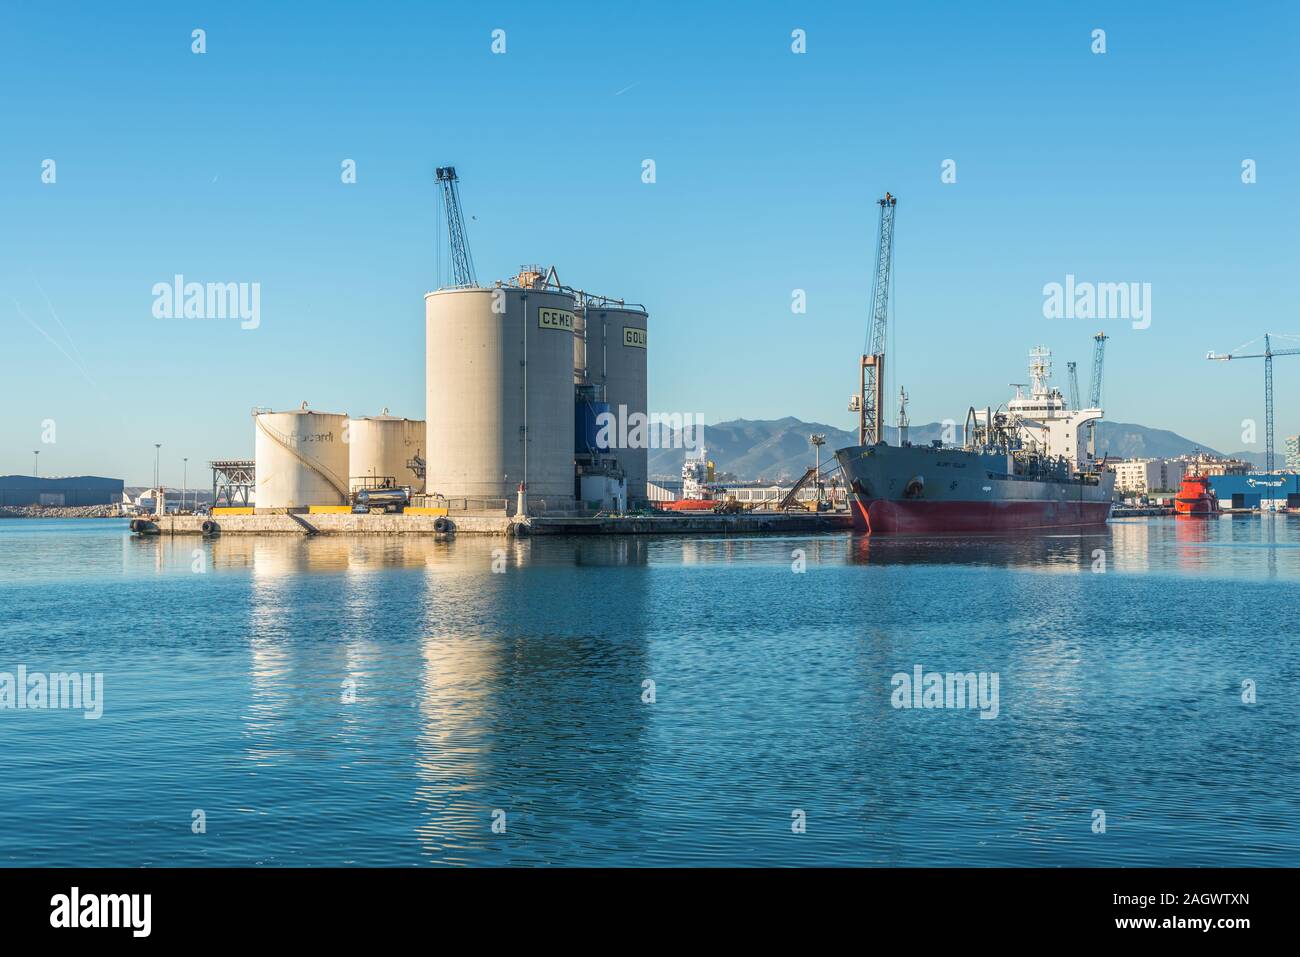 Malaga, Spain - December 4, 2018: Cement Carrier Vessel Glory Tellus and bulk storage of concrete cement silos and Bacardi tanks at entrance of Malaga Stock Photo